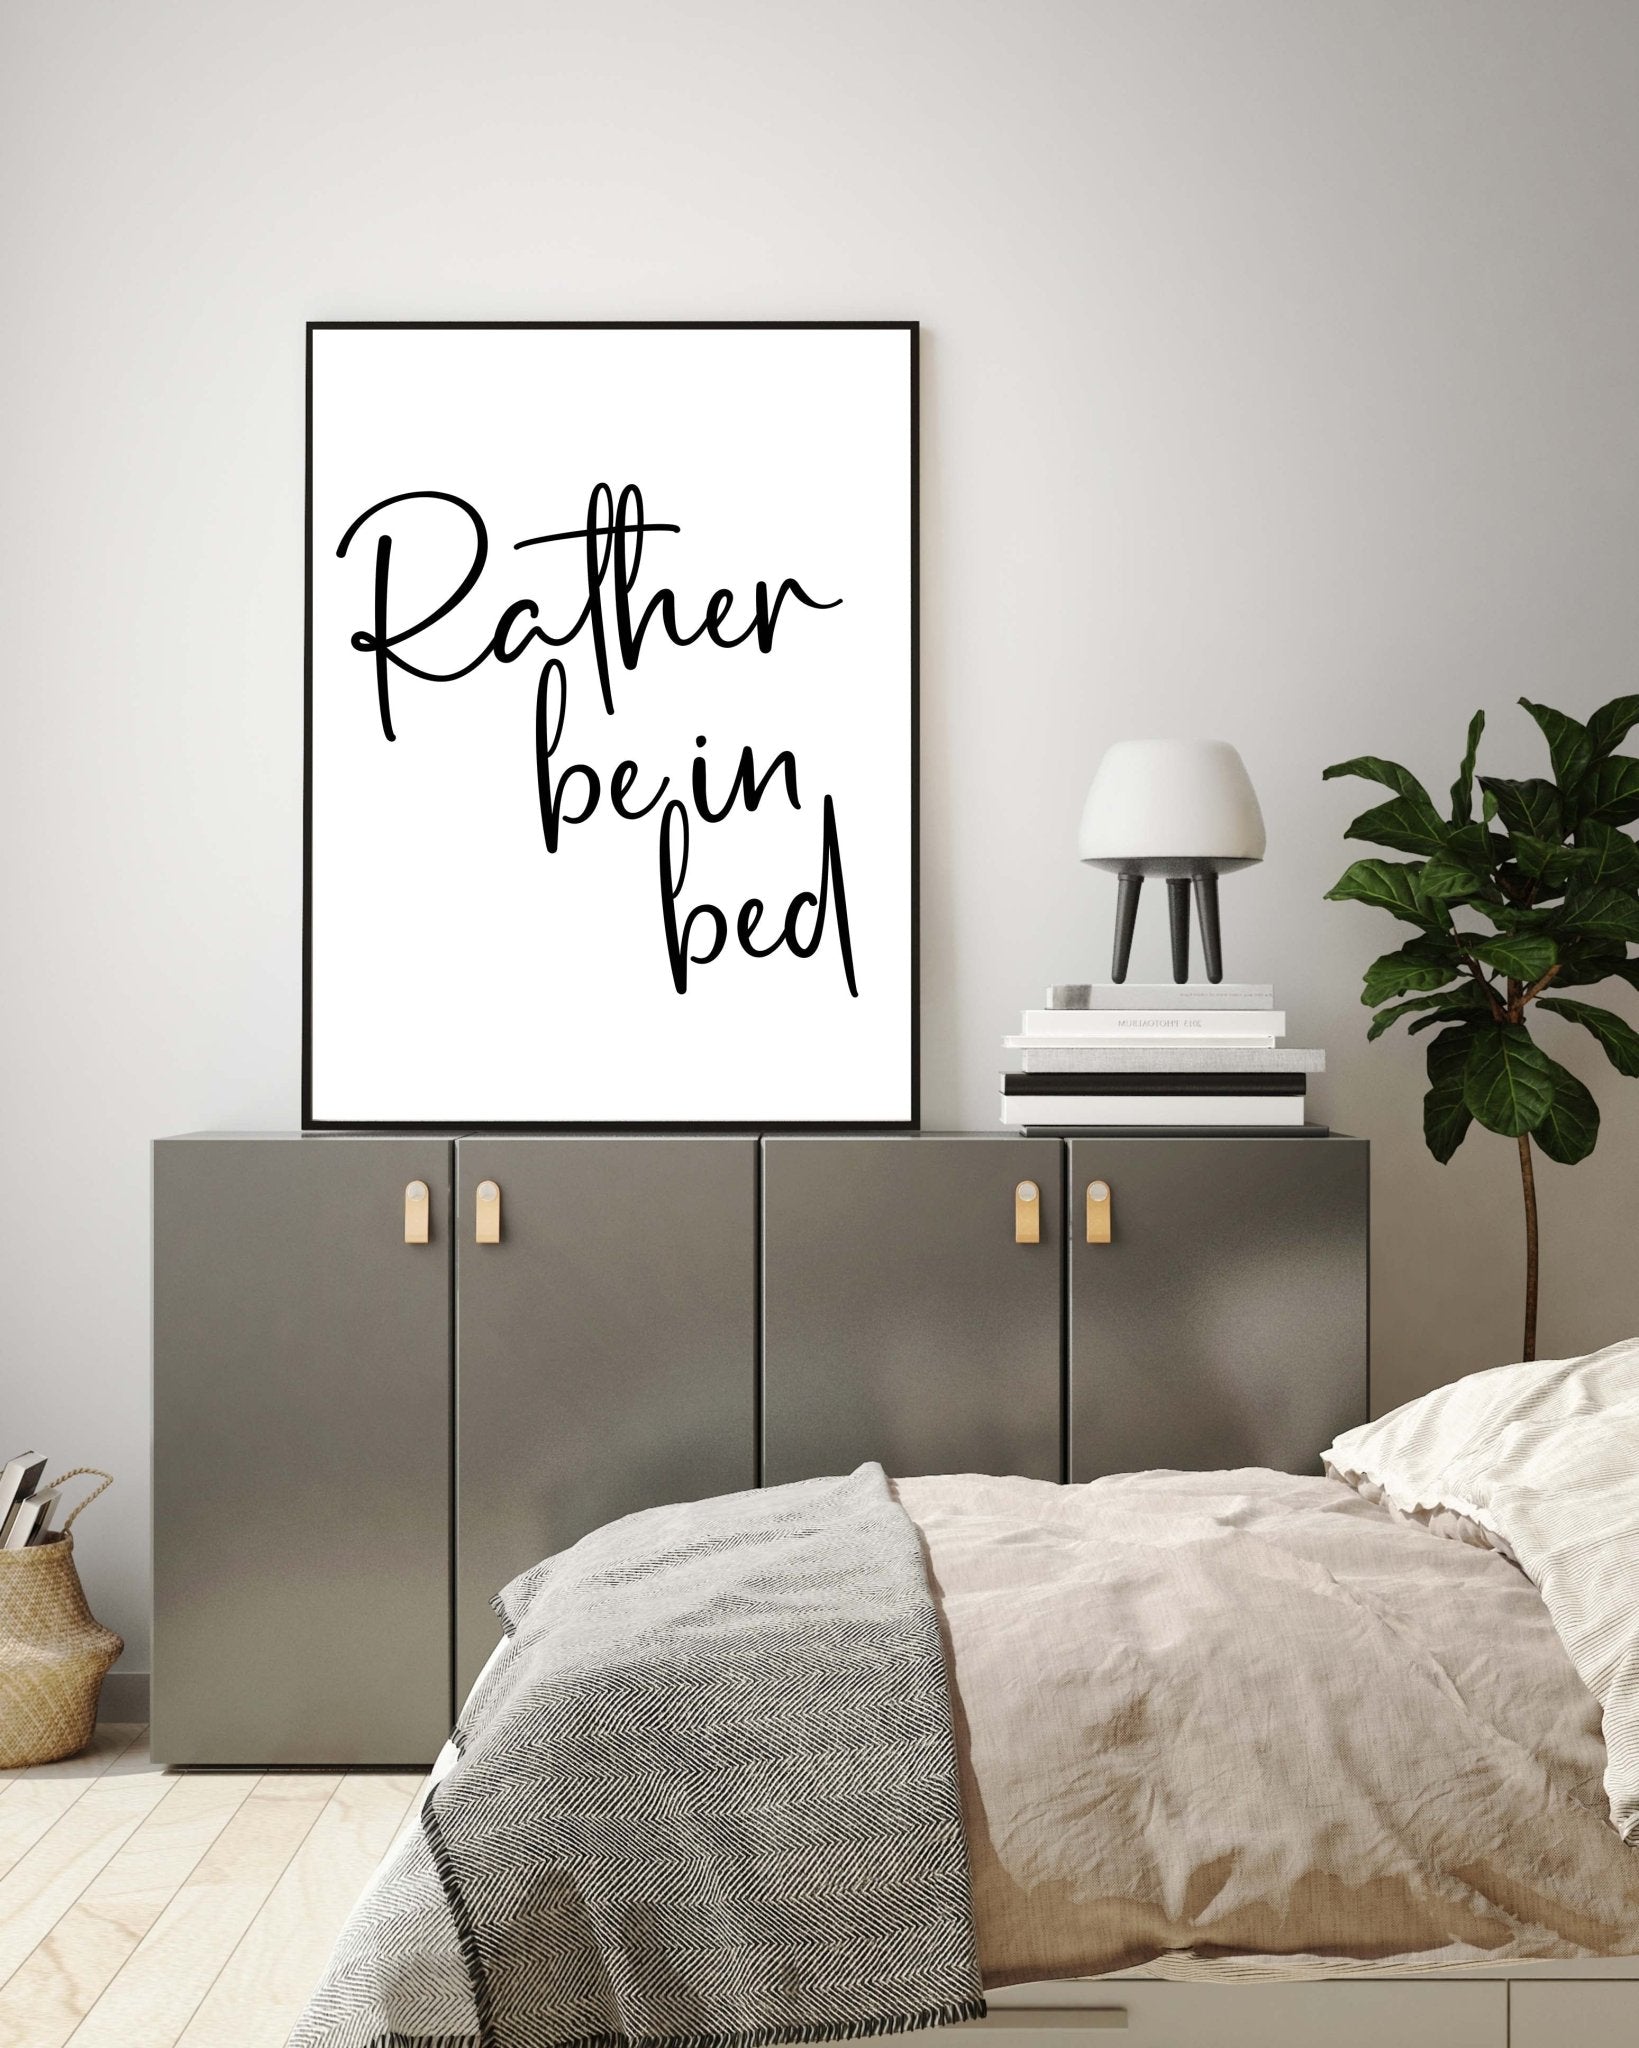 Rather Be In Bed Poster - D'Luxe Prints